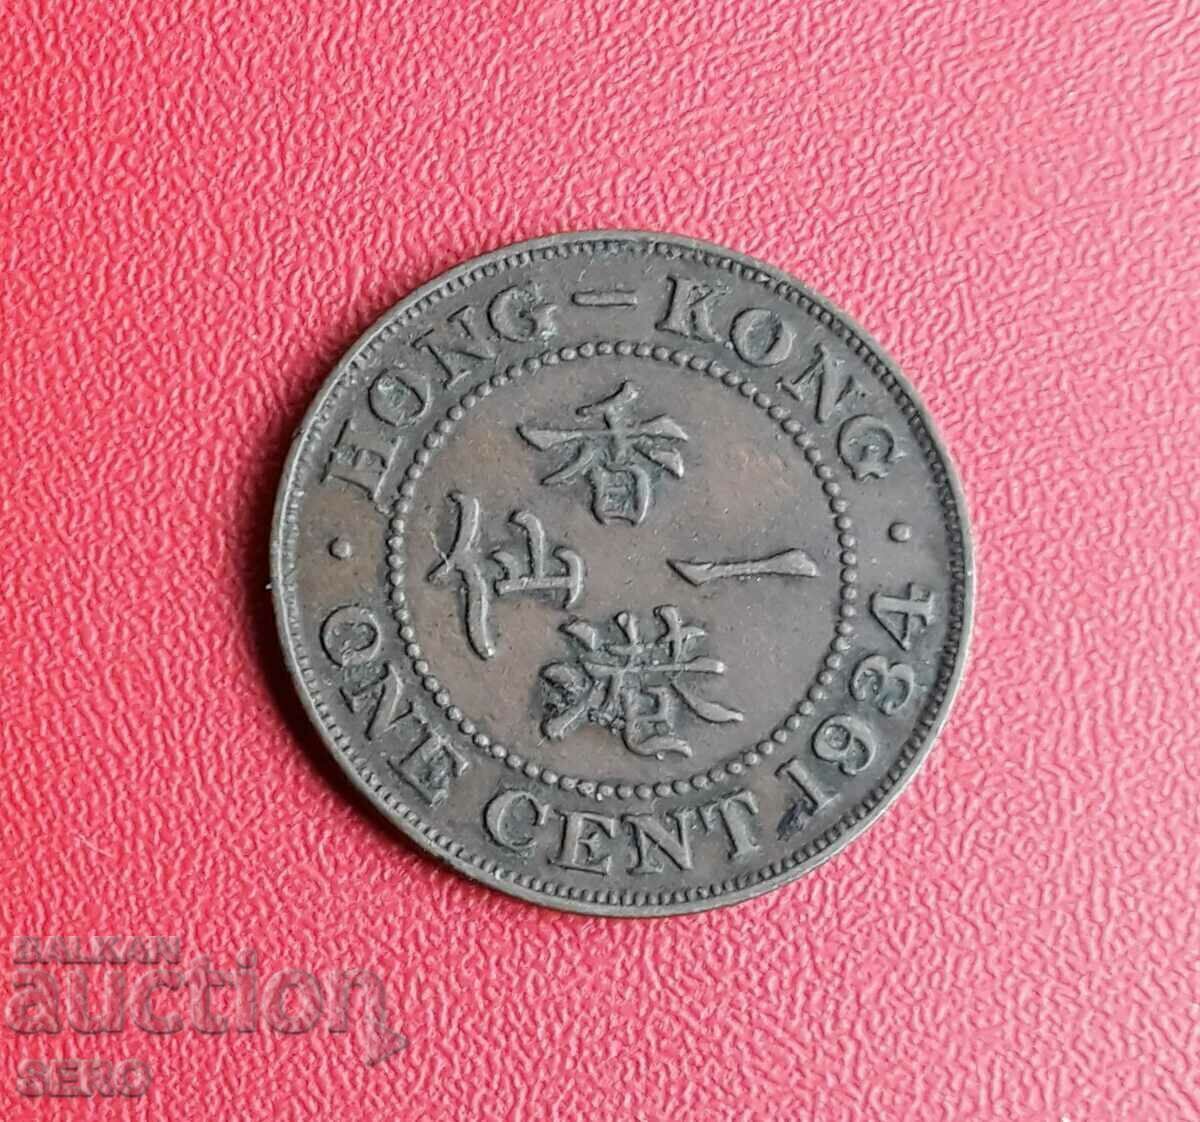 Hong Kong-1 cent 1934-nicely preserved